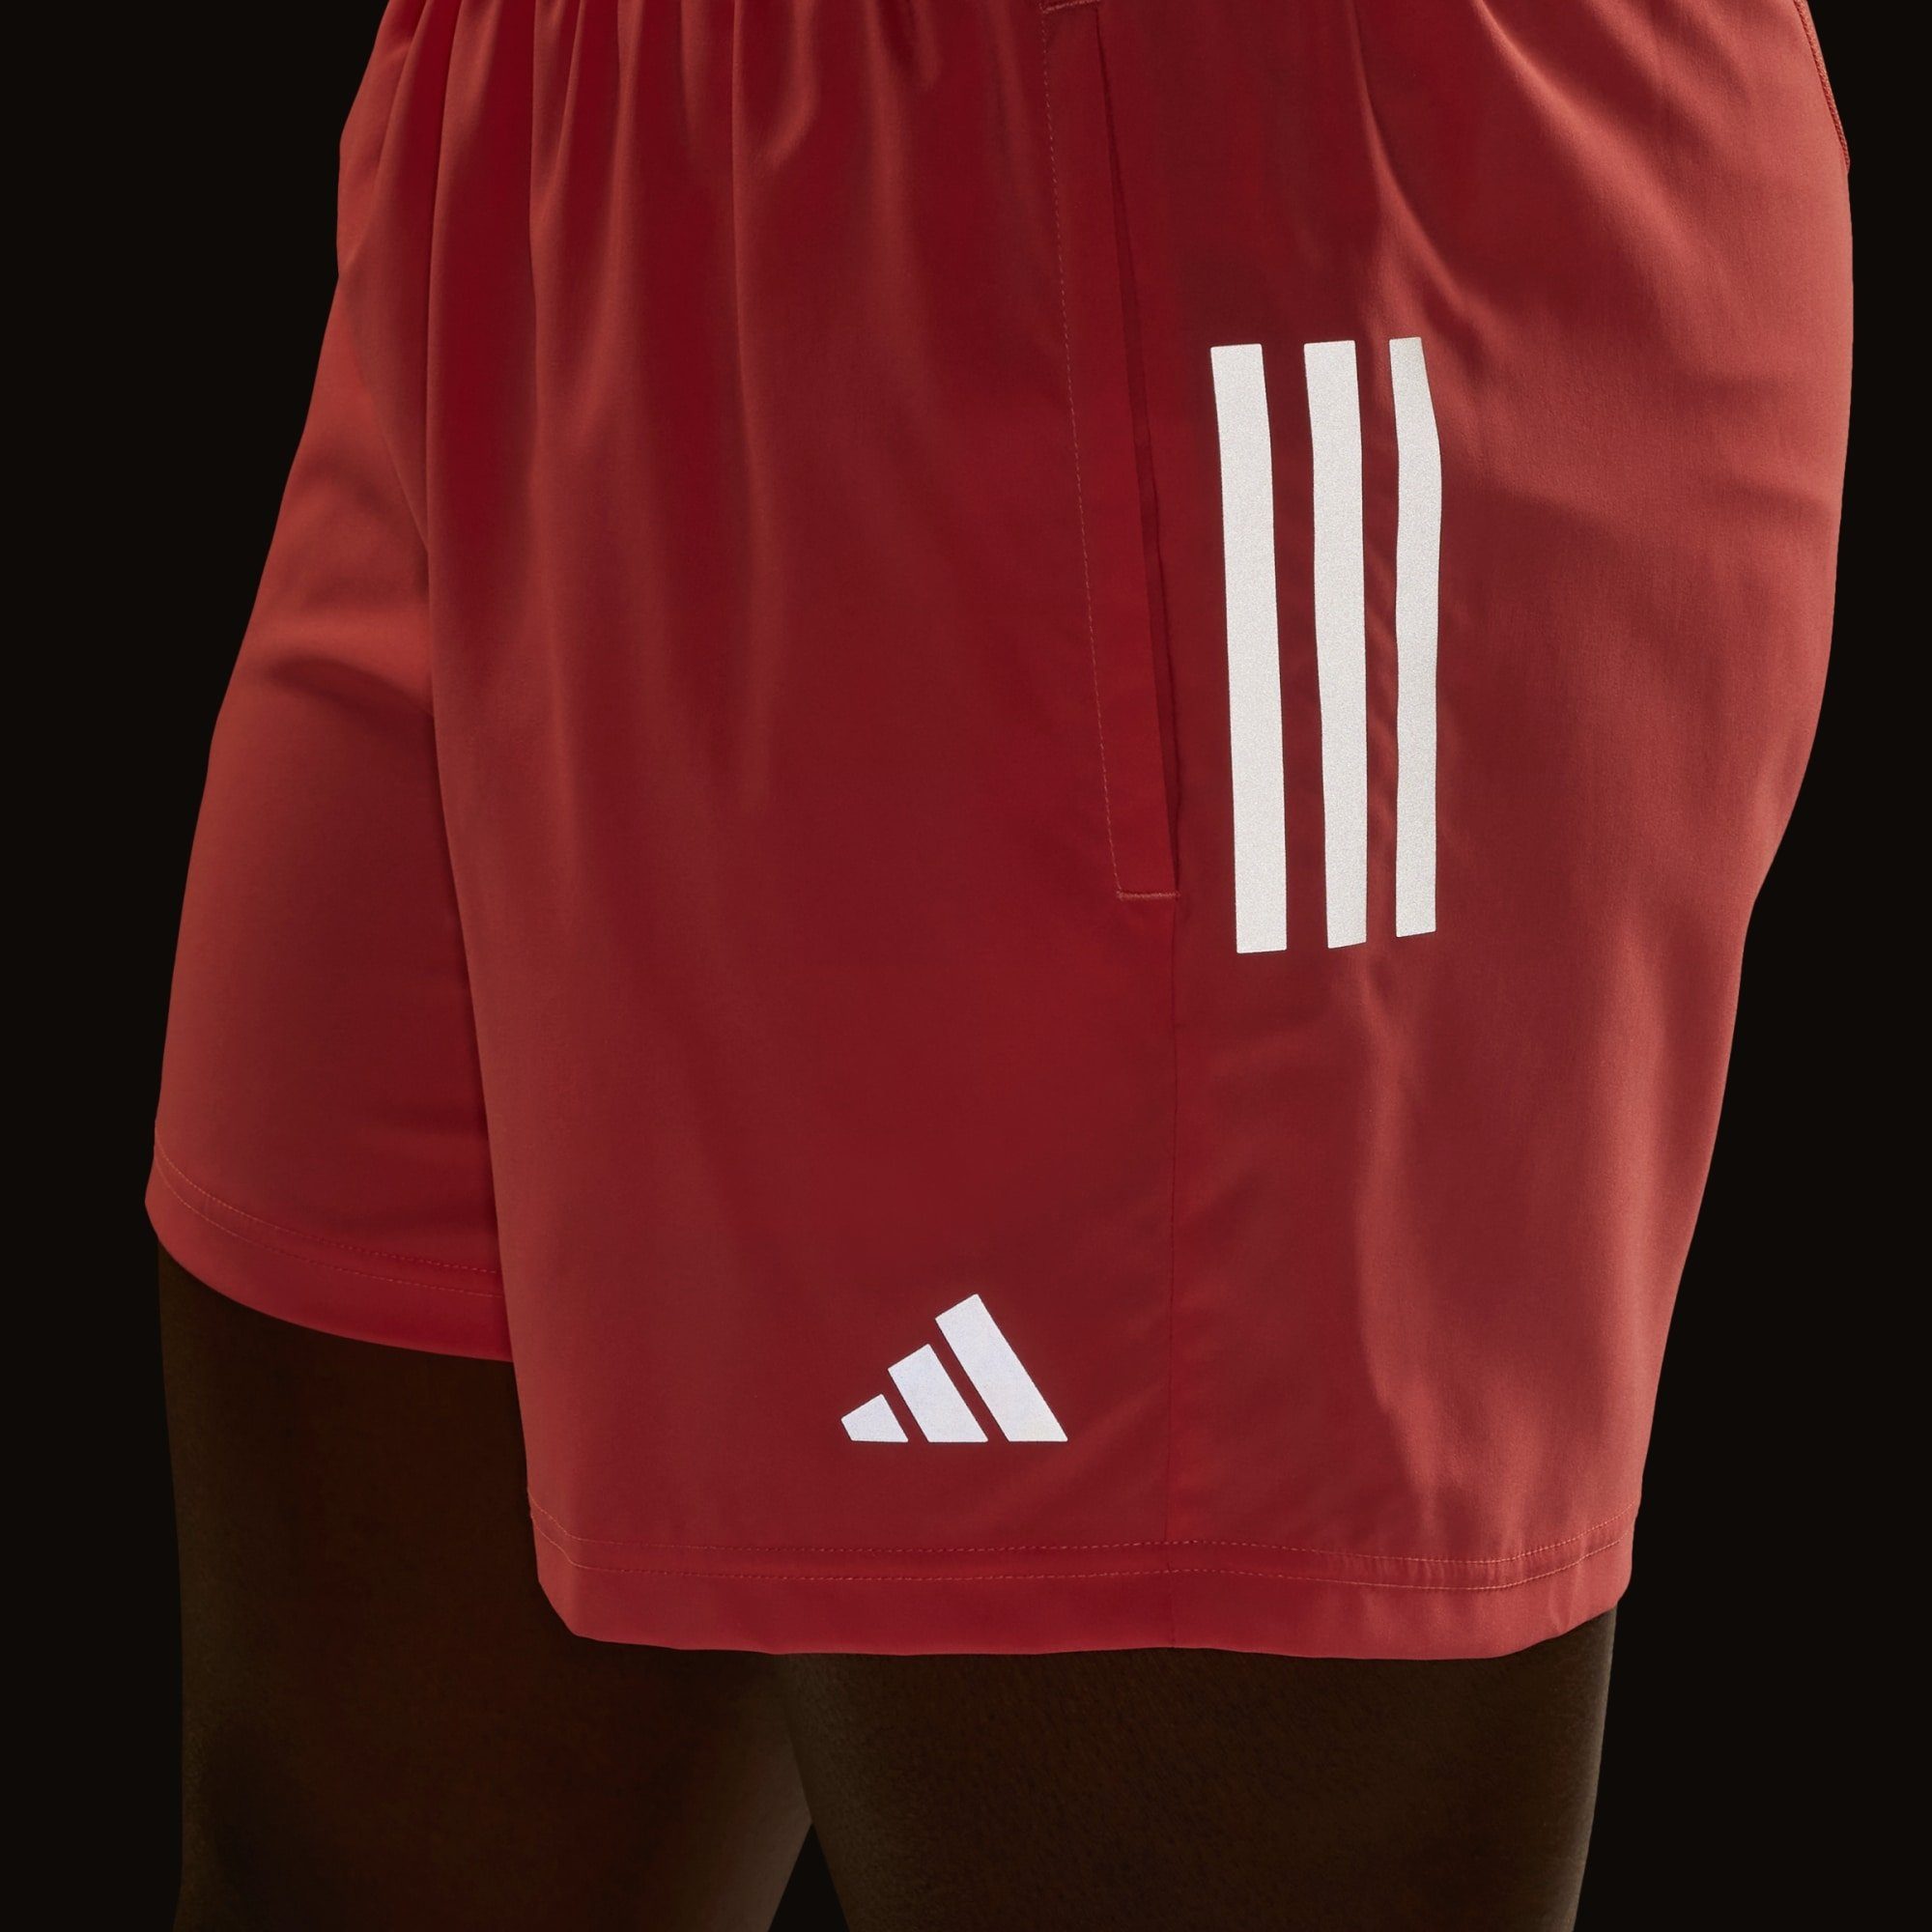 OWN Performance SHORTS adidas Laufshorts RUN Scarlet Preloved THE